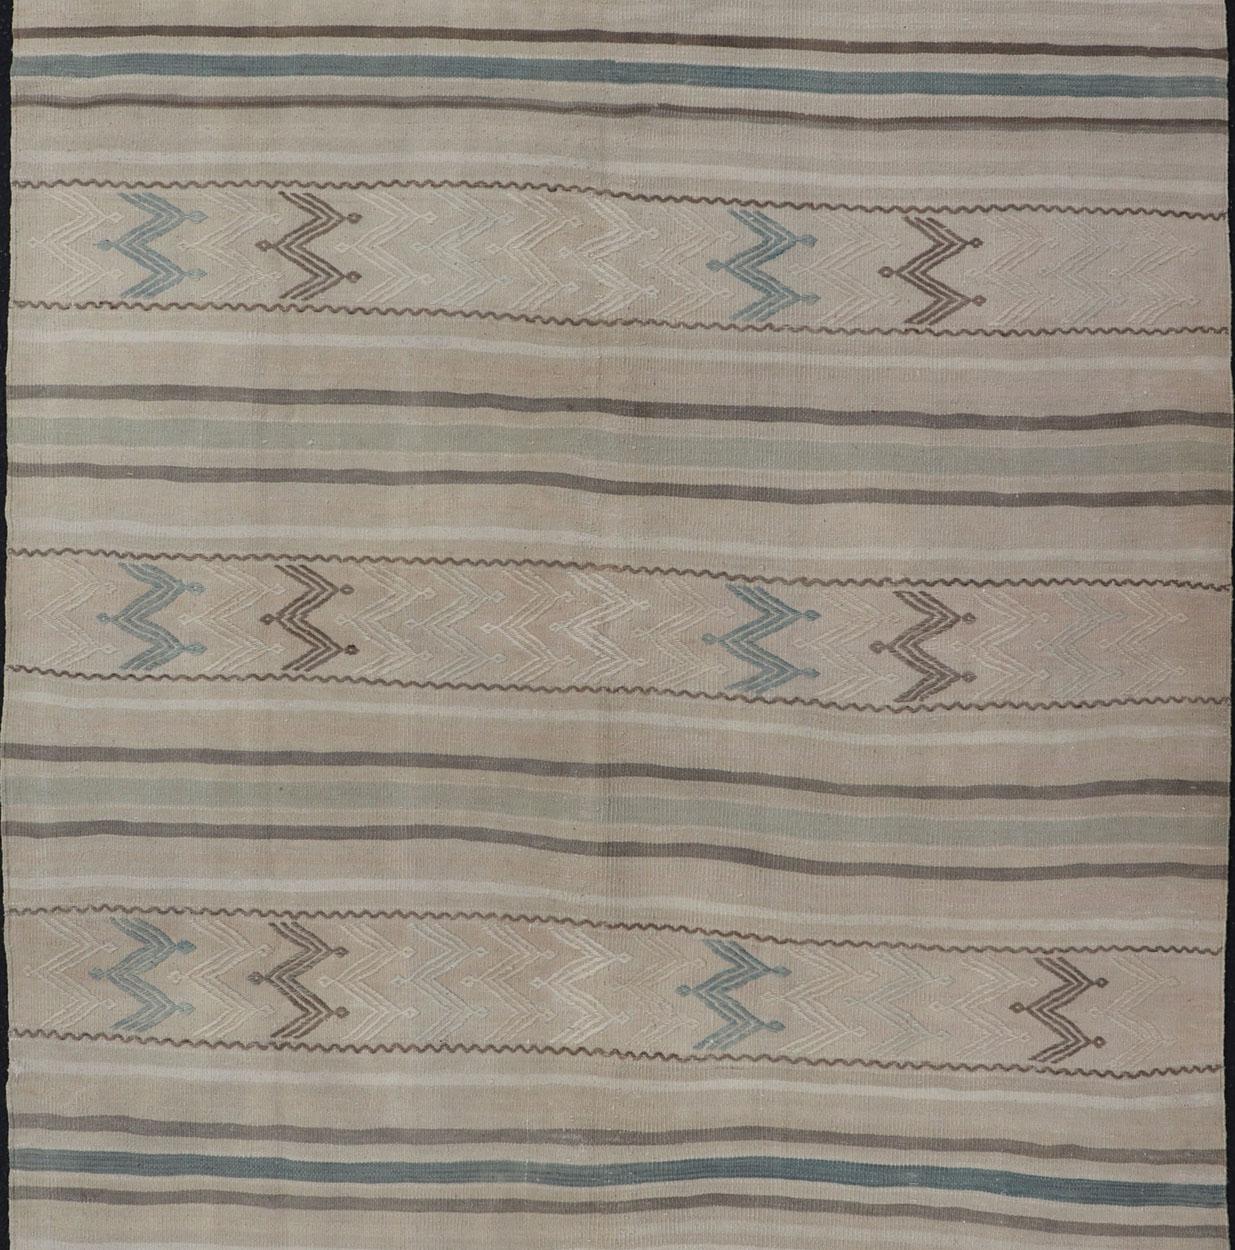 Minimalist design Kilim from light blue, brown, and taupe Turkey, Keivan Woven Arts / rug/EN-179456, country of origin / type: Turkey / Kilim, circa 1950

This vintage flat-woven Kilim features a minimalist design rendered in thin brown, light blue,